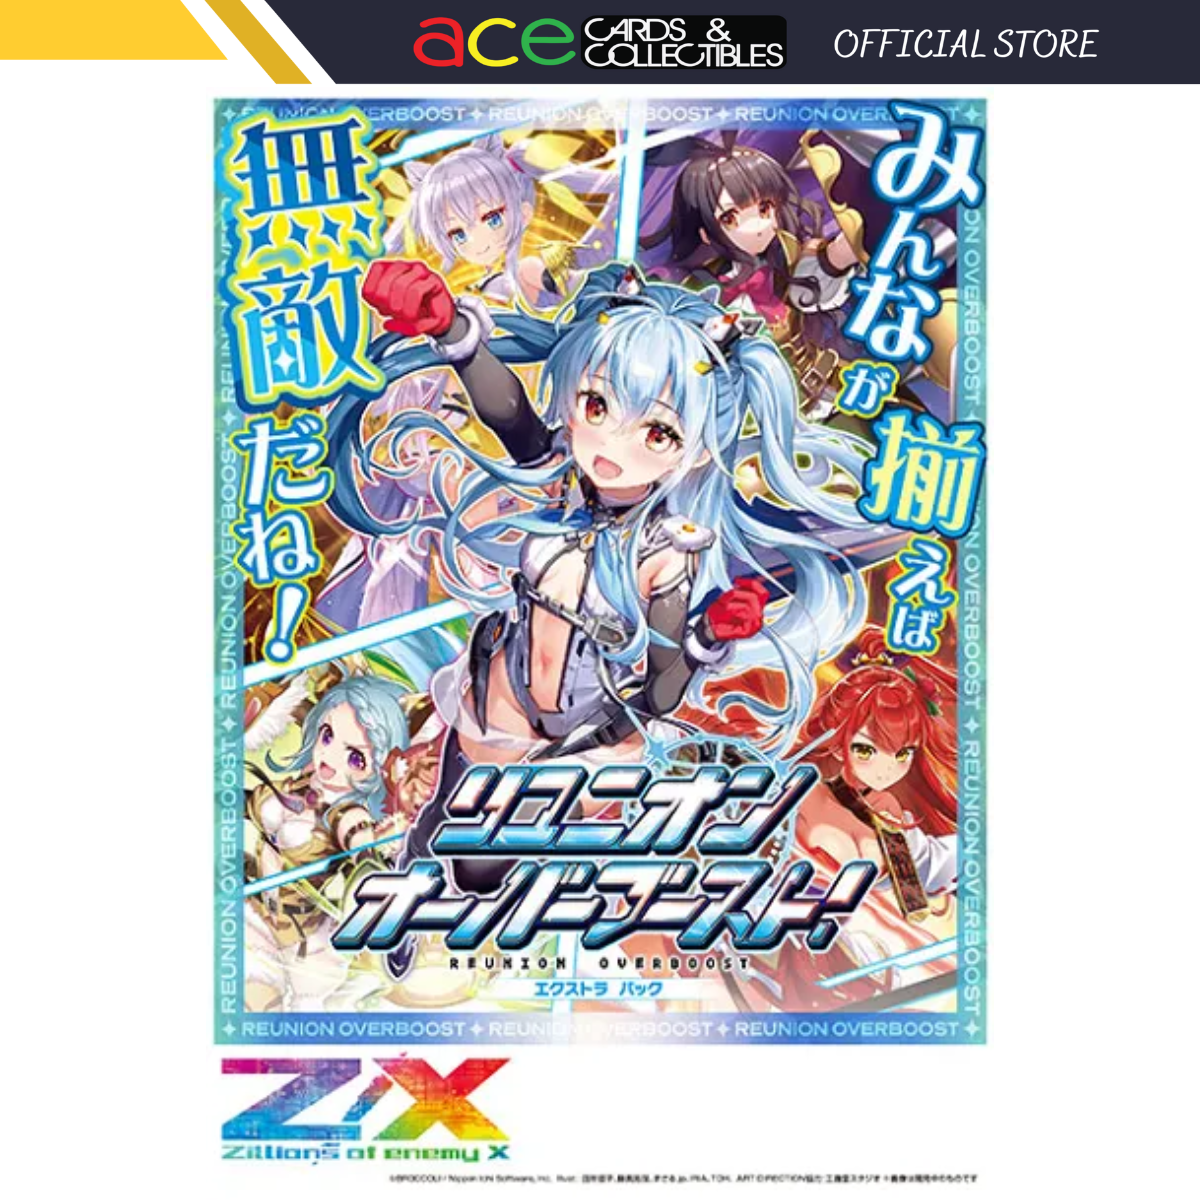 Z/X -Zillions of enemy X - The Extra Pack The 45th - Reunion Overboost [ZX-E-45] (Japanese)-Single Pack (Random)-Broccoli-Ace Cards & Collectibles